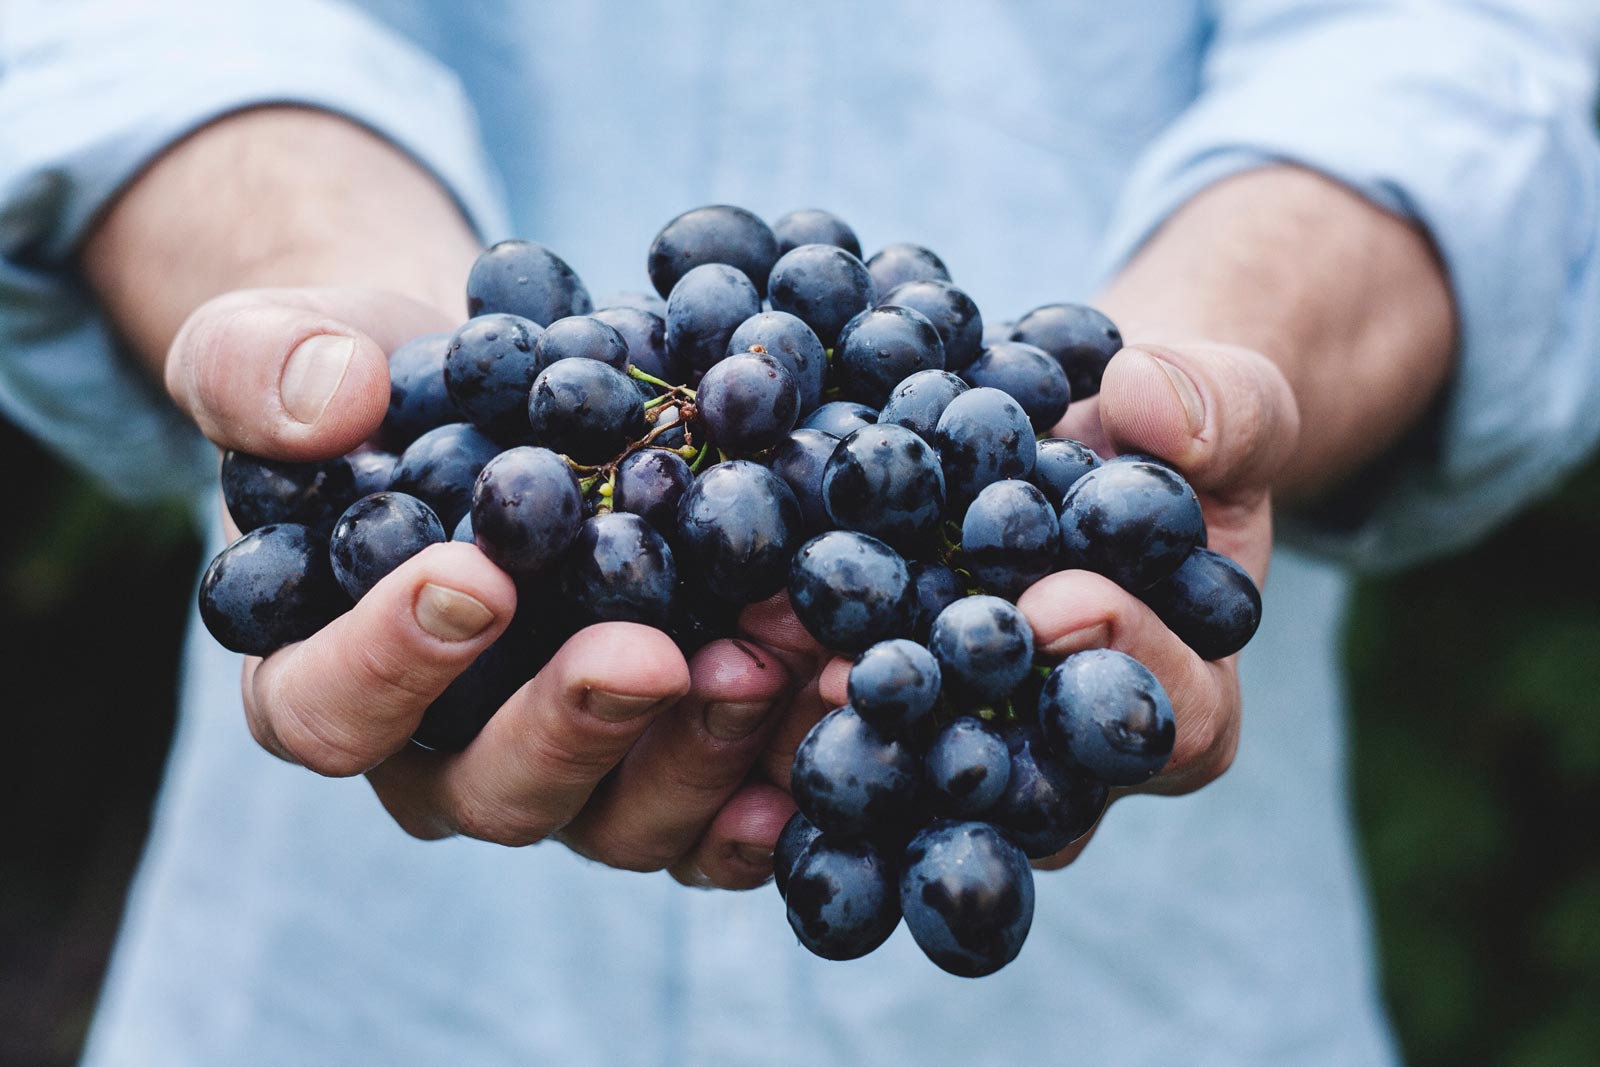 5 Things You Probably Didn’t Know About Grapes